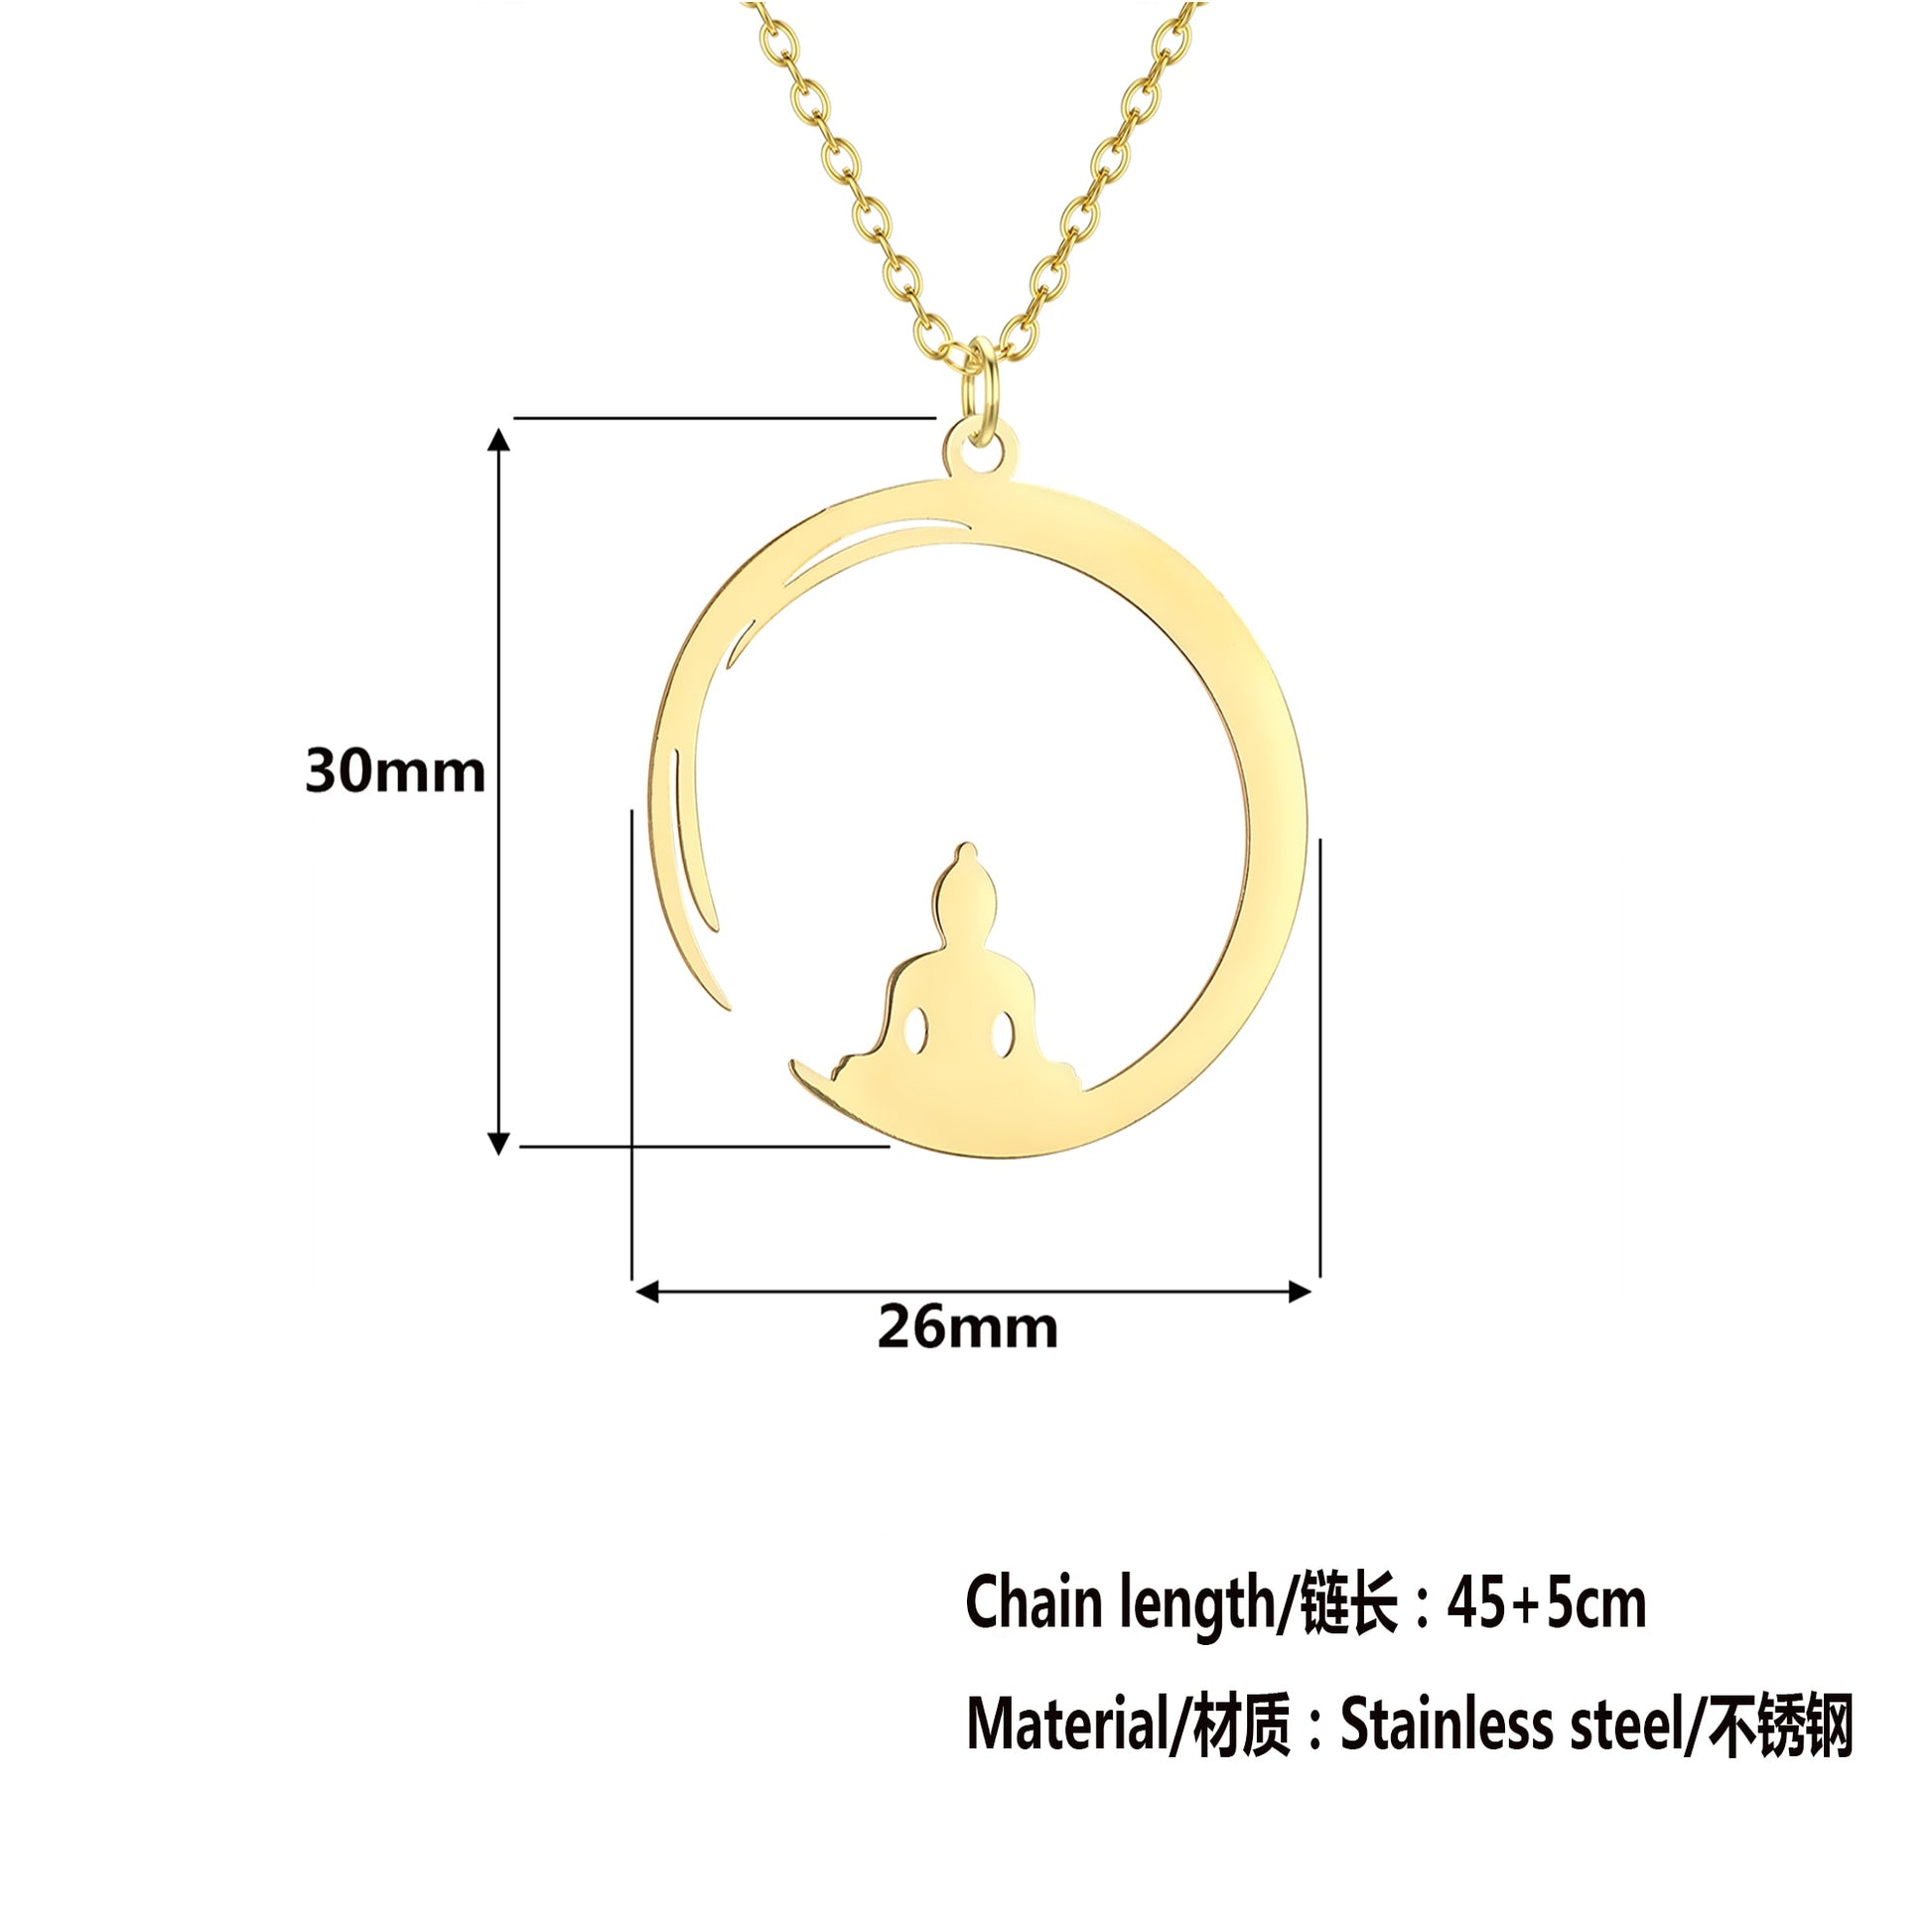 Todorova Stainless Steel Round Buddhism Meditation Pendent Buddha Yoga Necklace For Women Men Amulet Choker Jewelry Gifts - Charlie Dolly